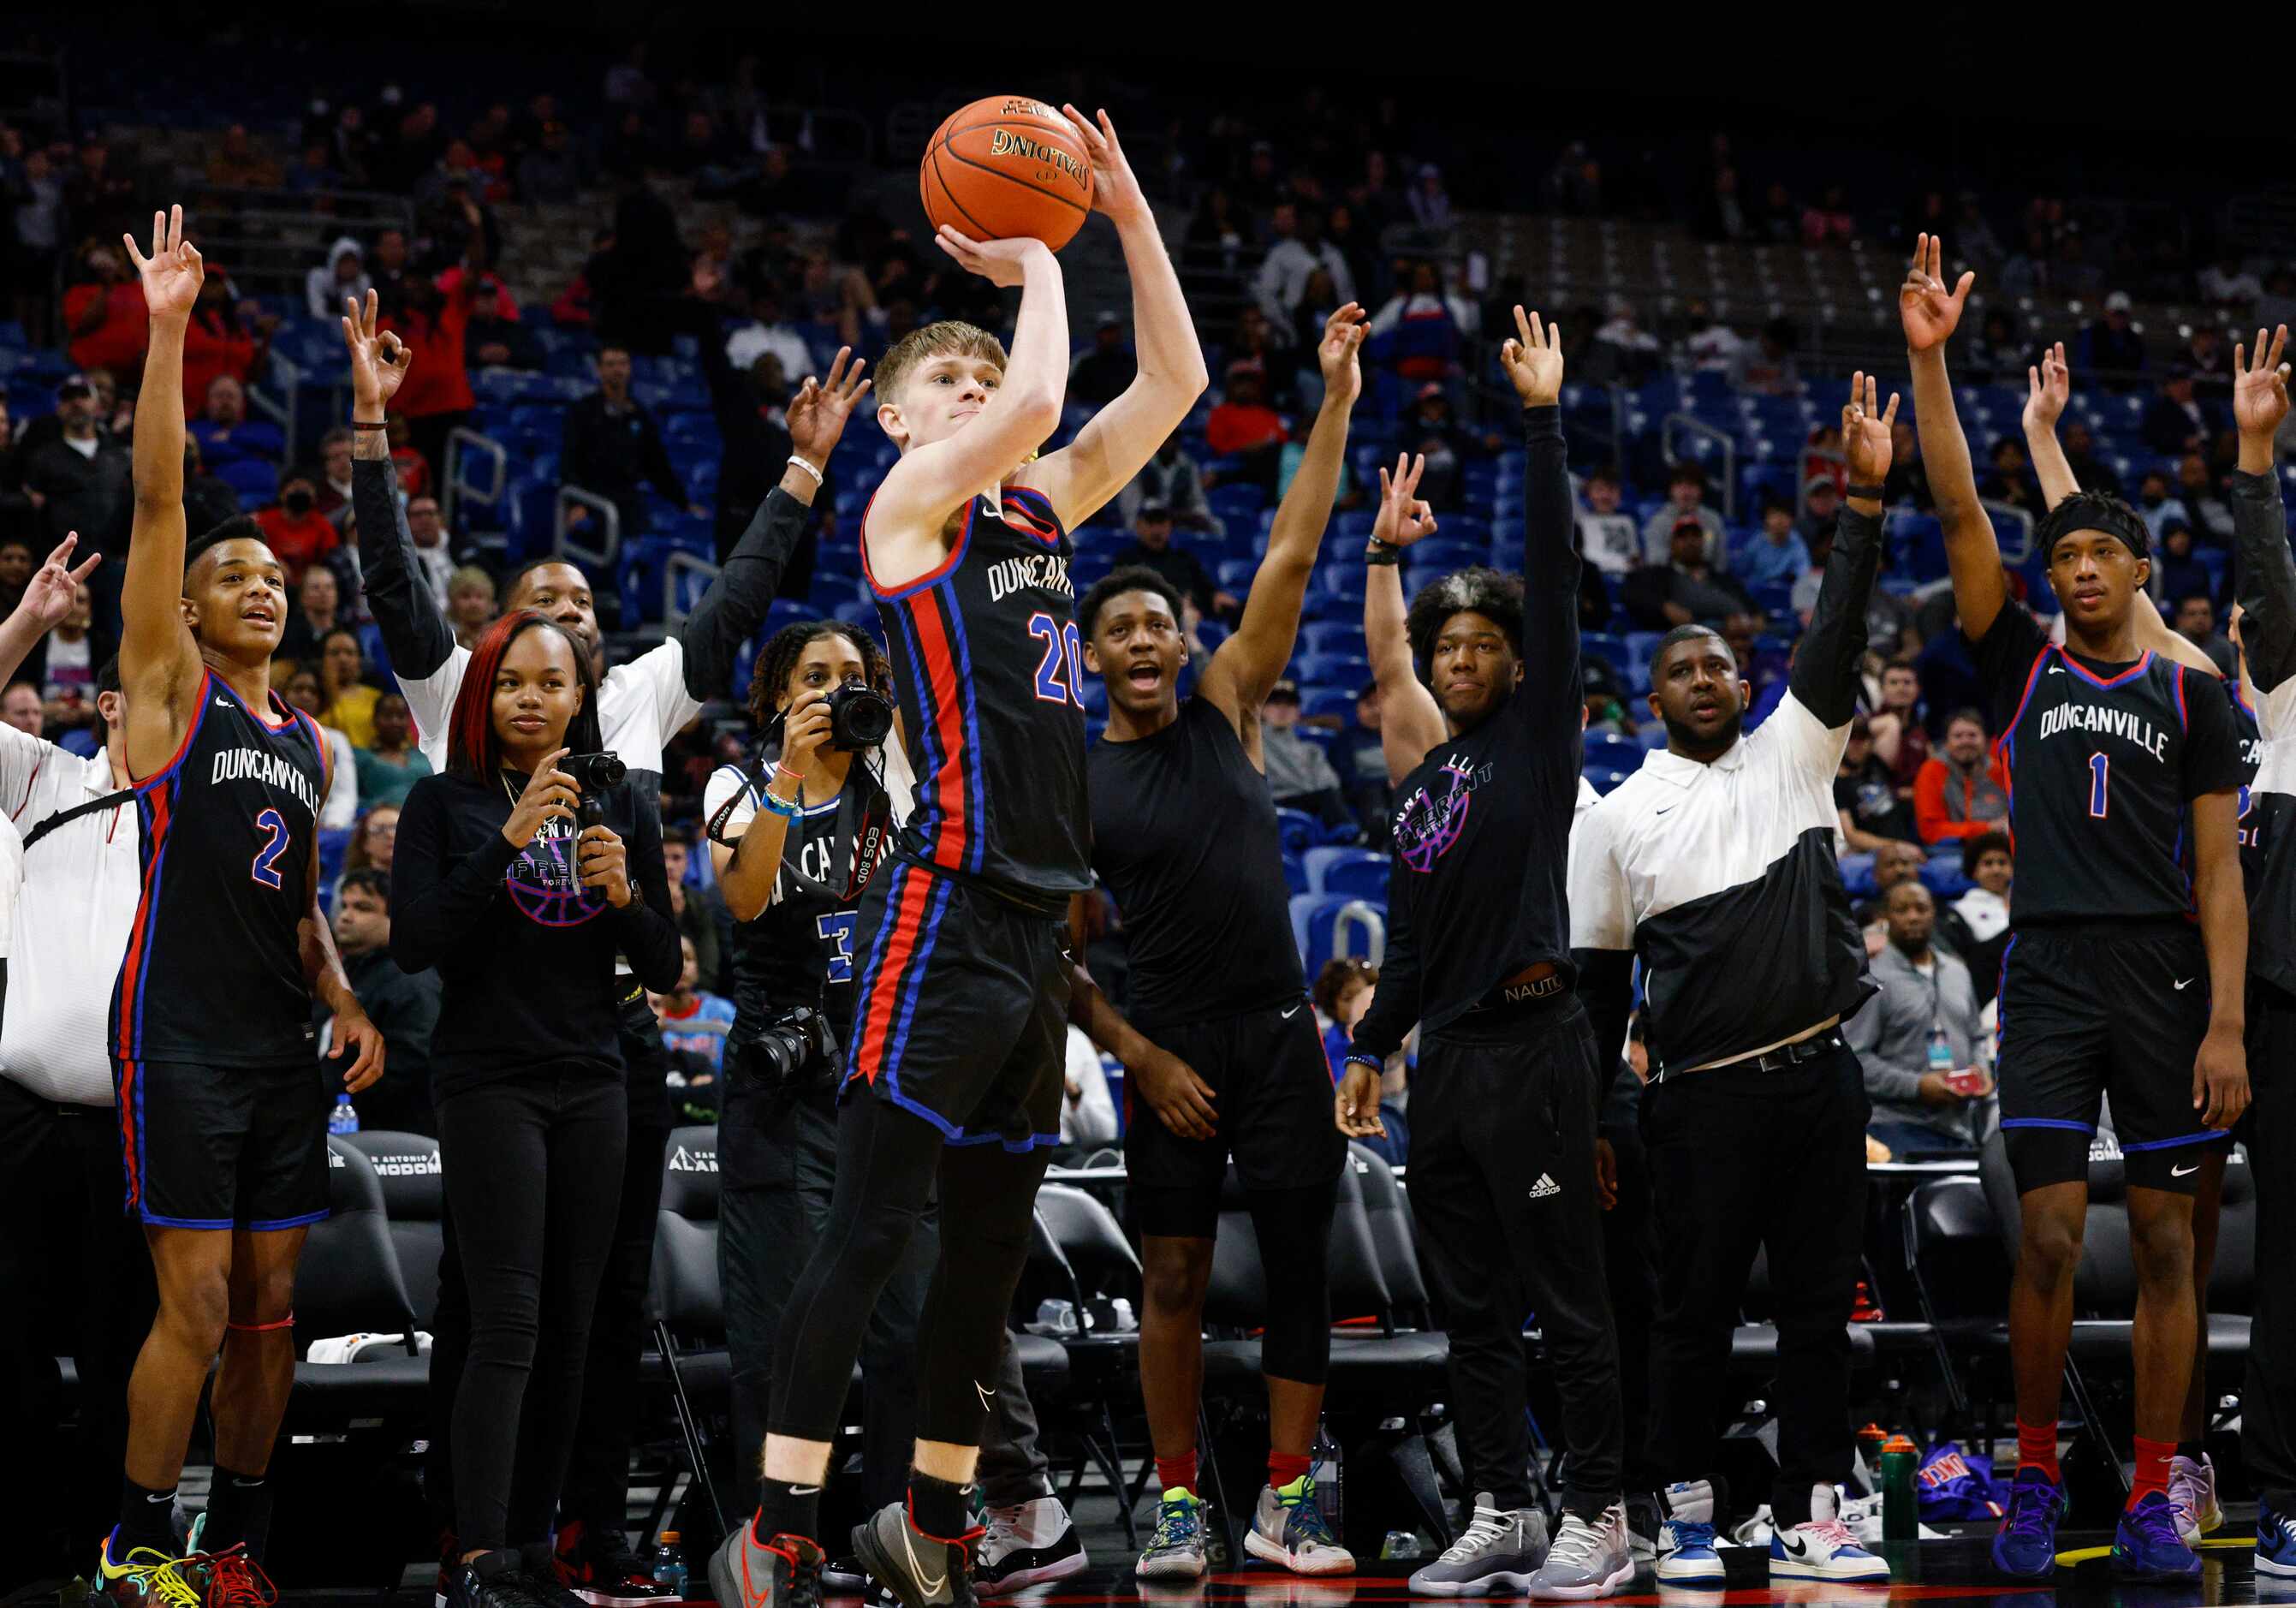 Duncanville guard Jackson Prince (20) shoots a three-point shot during the final seconds of...